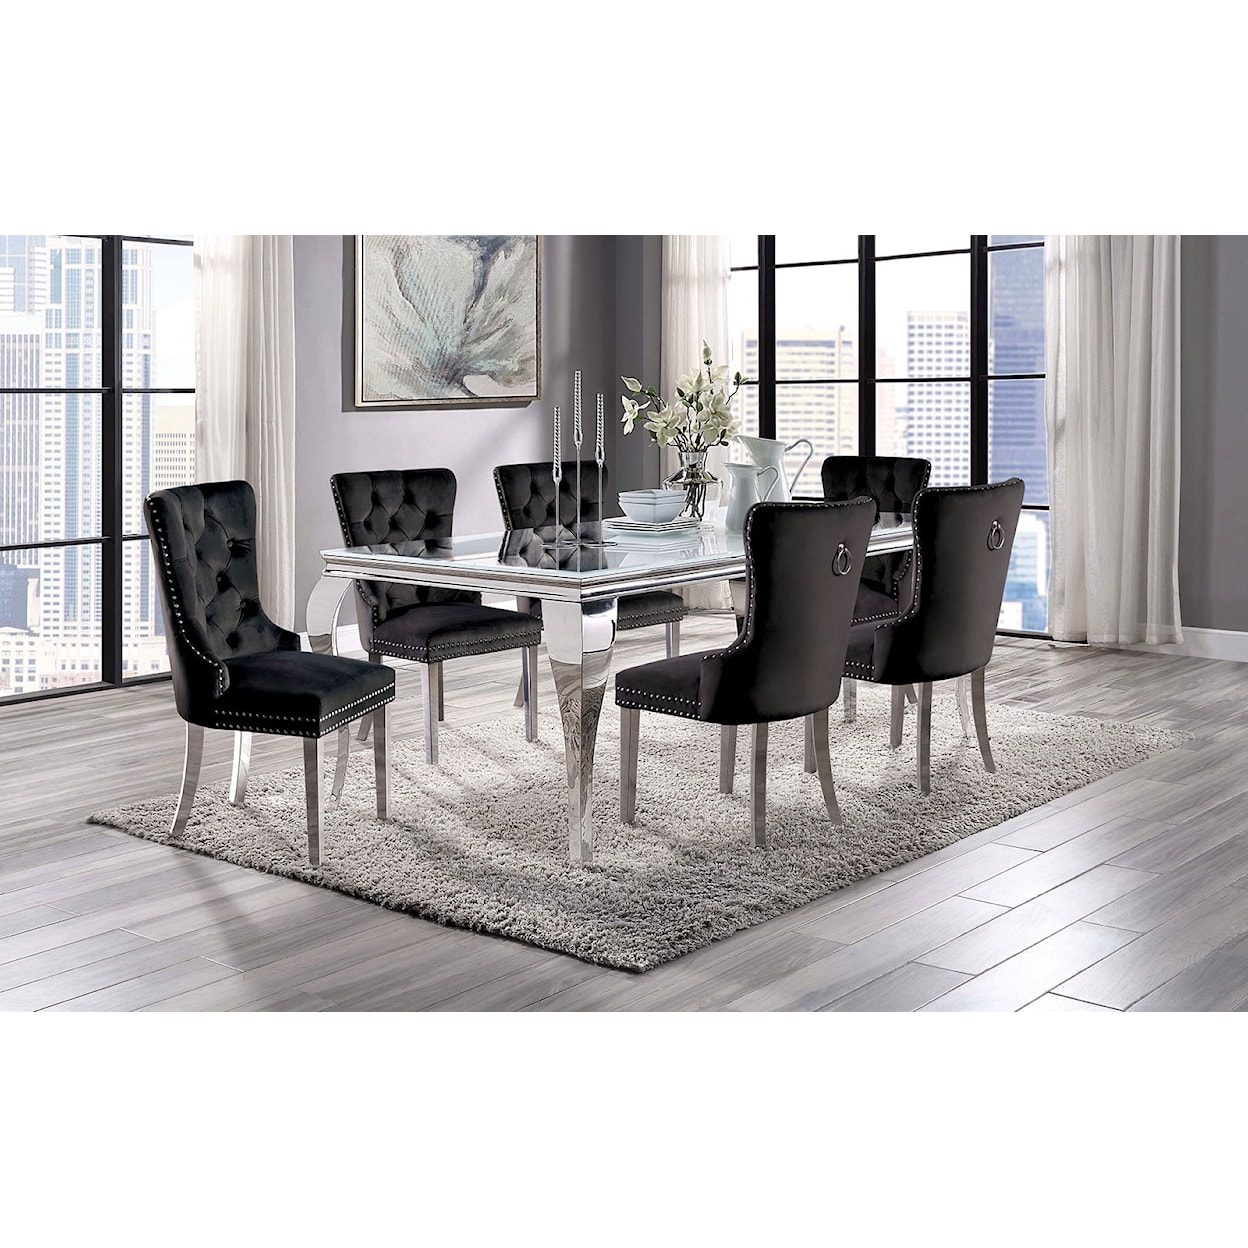 Furniture of America Neuveville 7-Piece Dining Set with Black Chairs